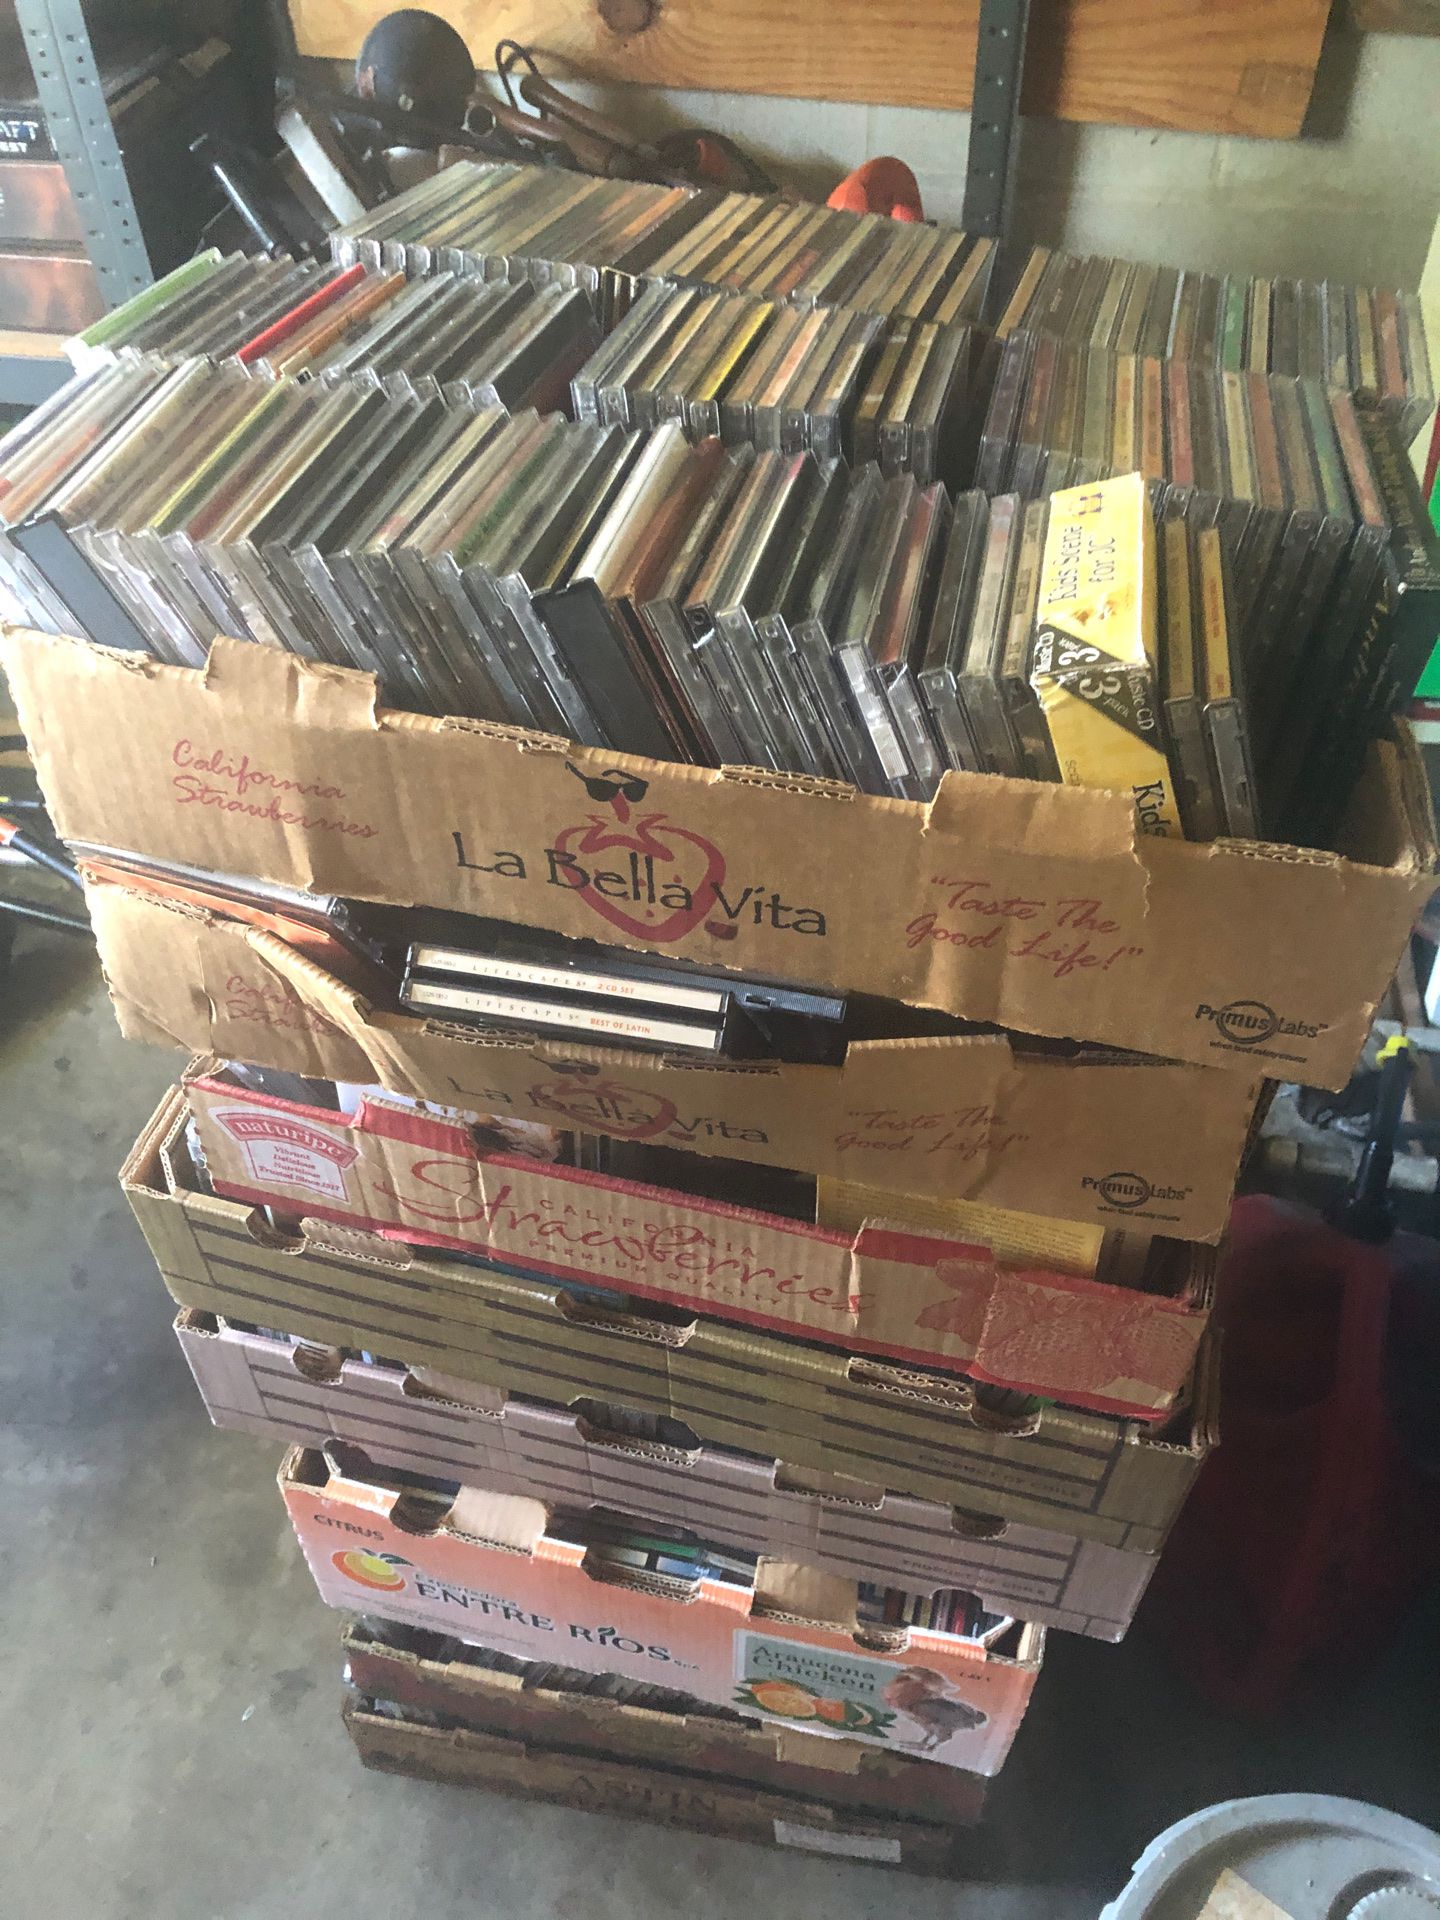 Over 1200 music cds all kinds of music some sealed